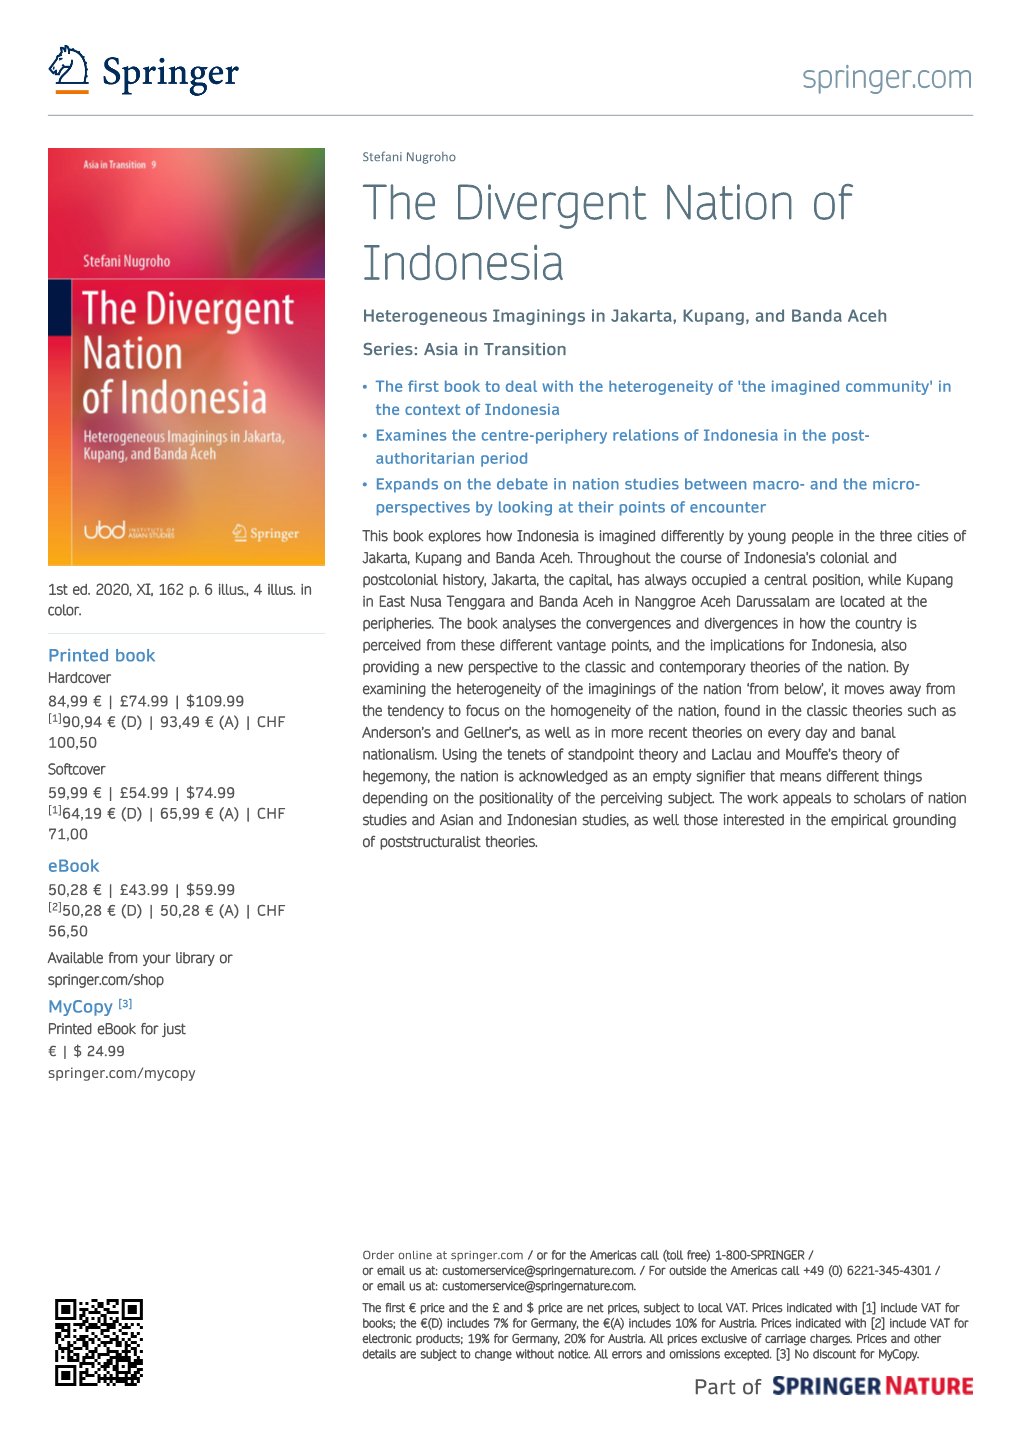 The Divergent Nation of Indonesia Heterogeneous Imaginings in Jakarta, Kupang, and Banda Aceh Series: Asia in Transition